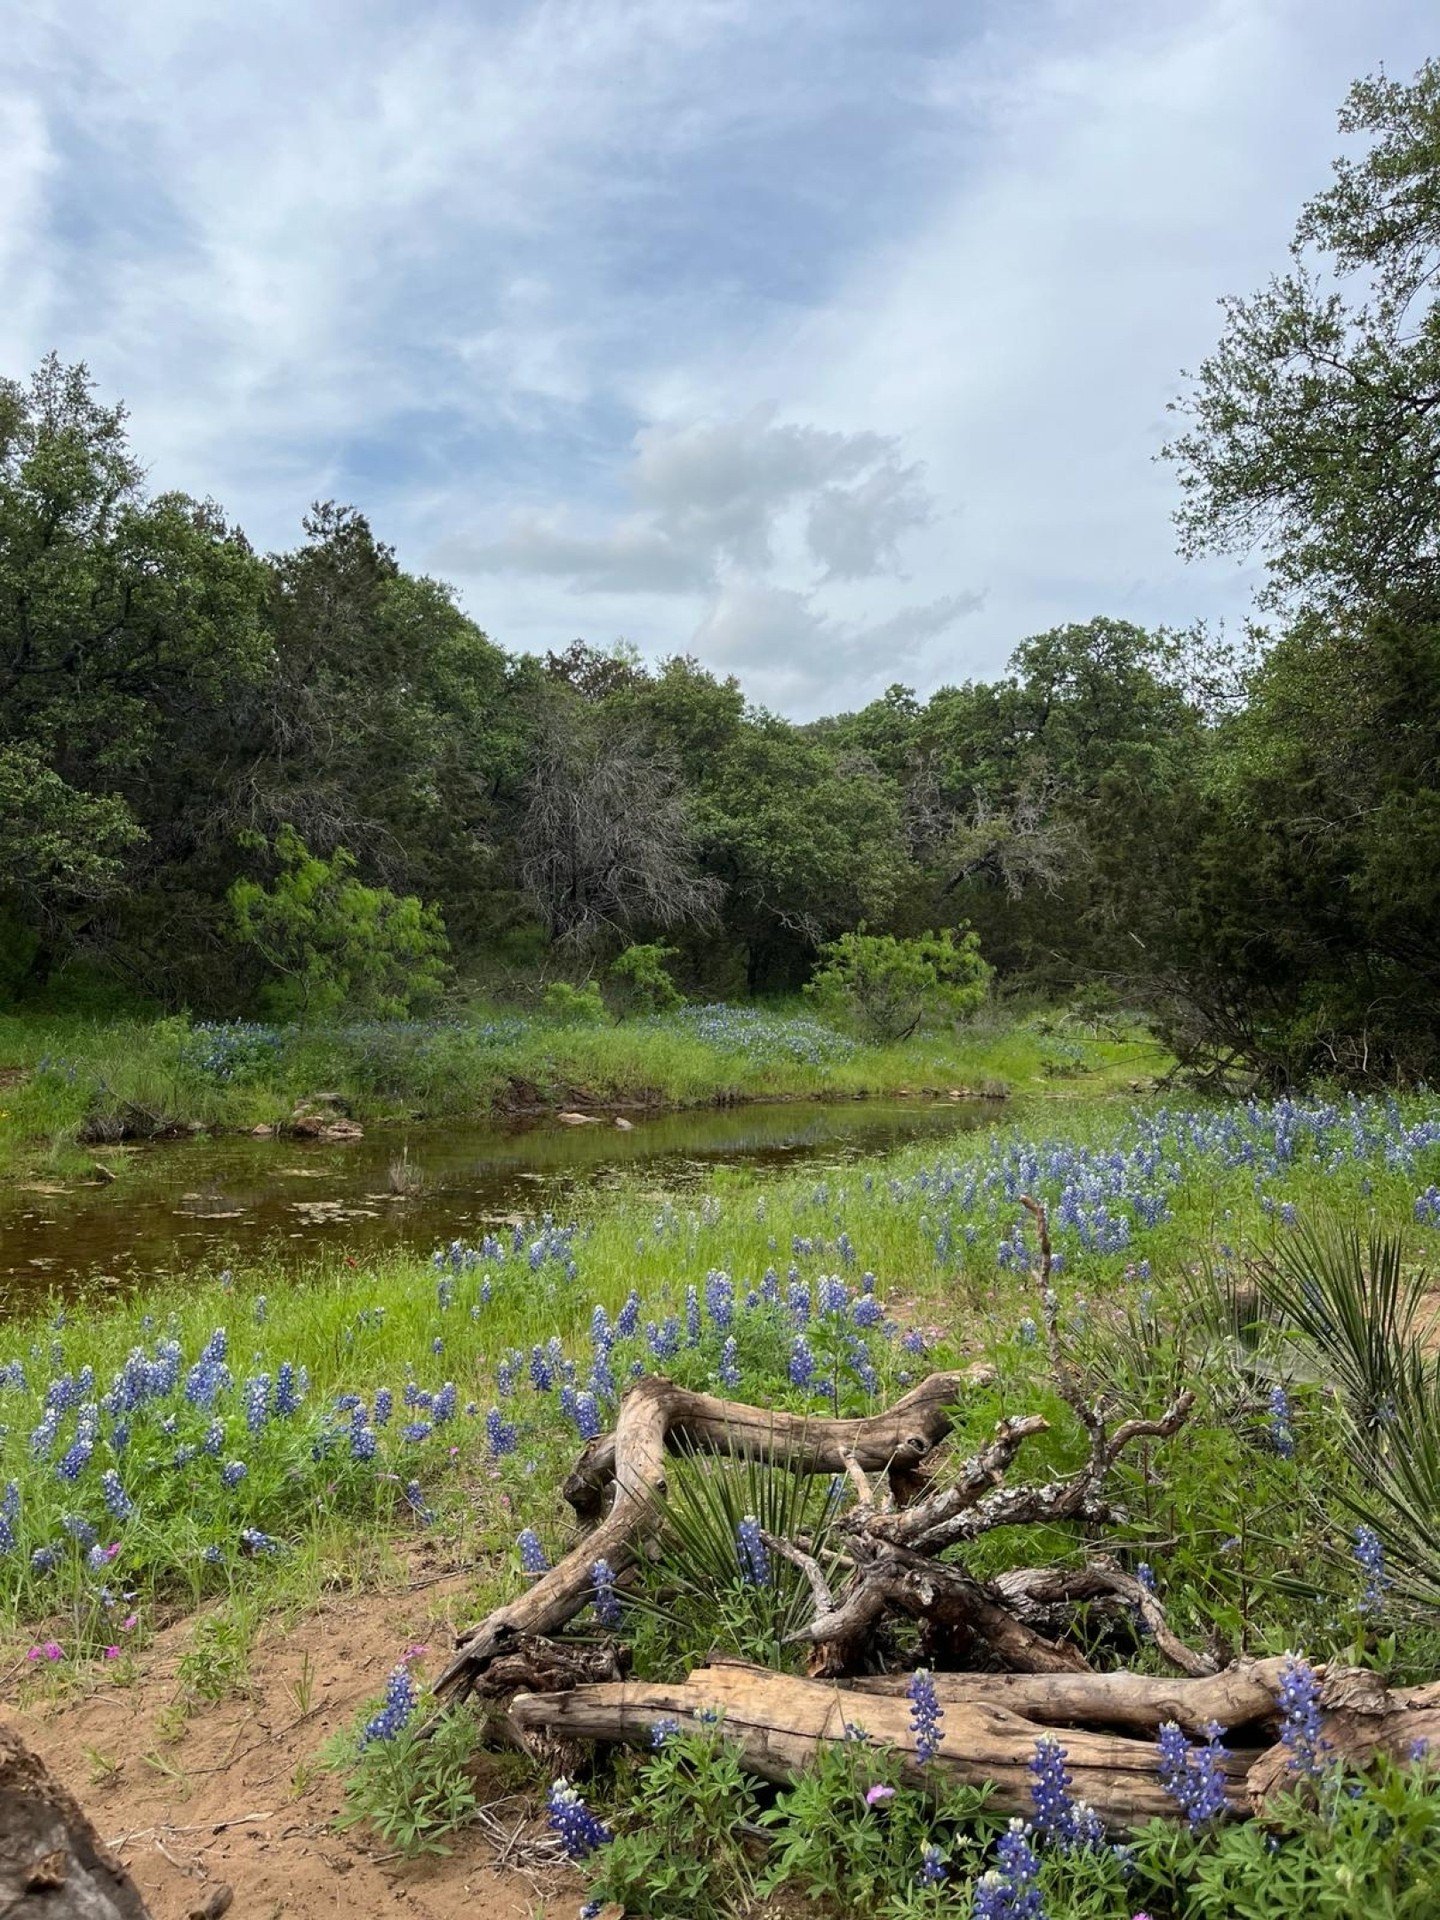 At the Texas Eclipse Festival, outside of Austin, I thought the nature was so beautiful! I had never been to Texas before and I thought the whole, HUGE state was a desert. Turns out, it is not! I was surprised how green it was with the grasses, oak t